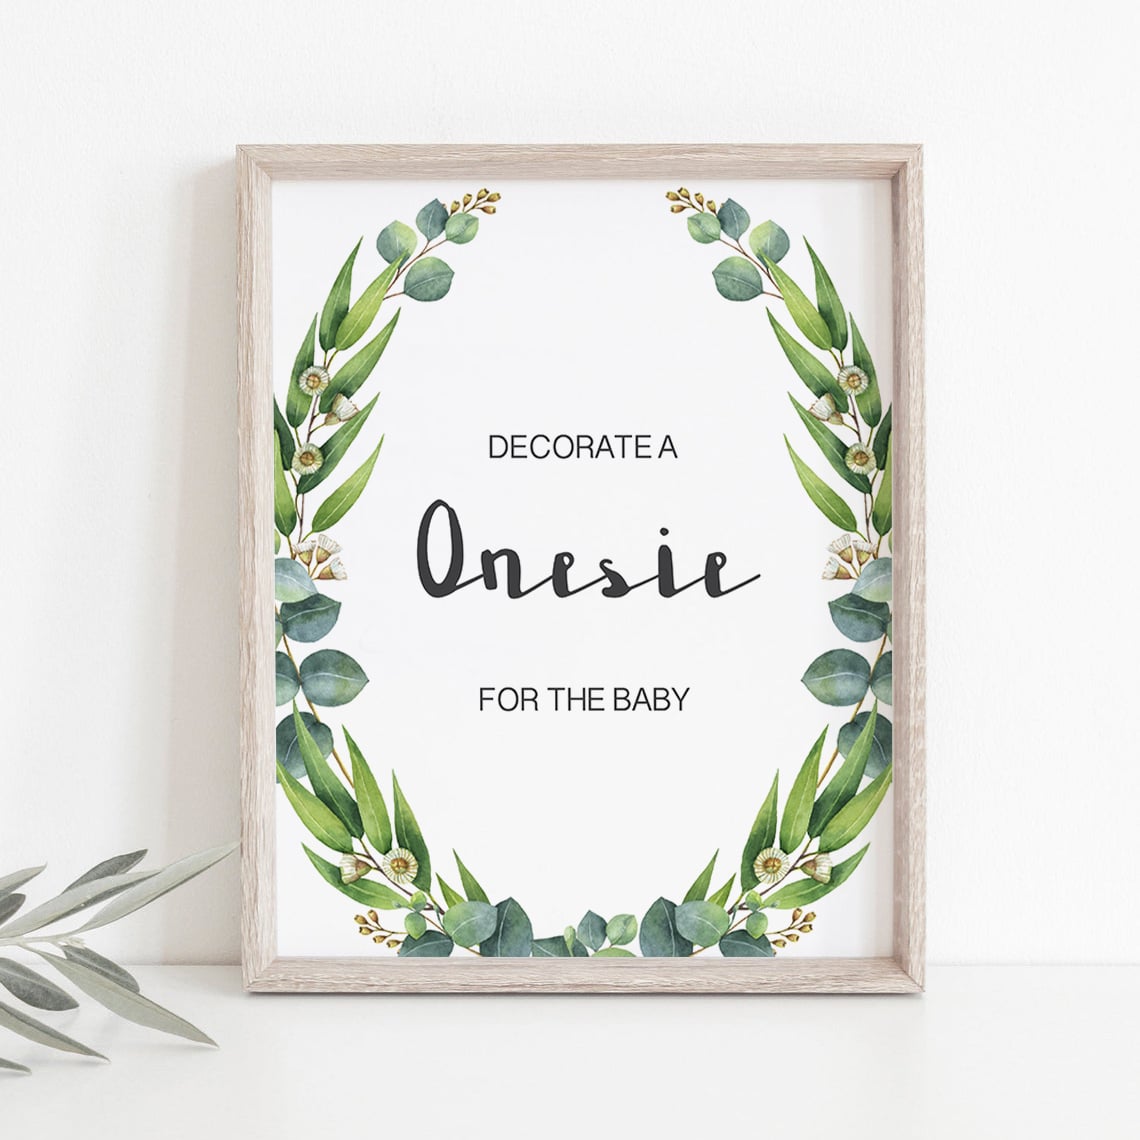 Watercolor leaves decorate a onesie station sign printable by LittleSizzle